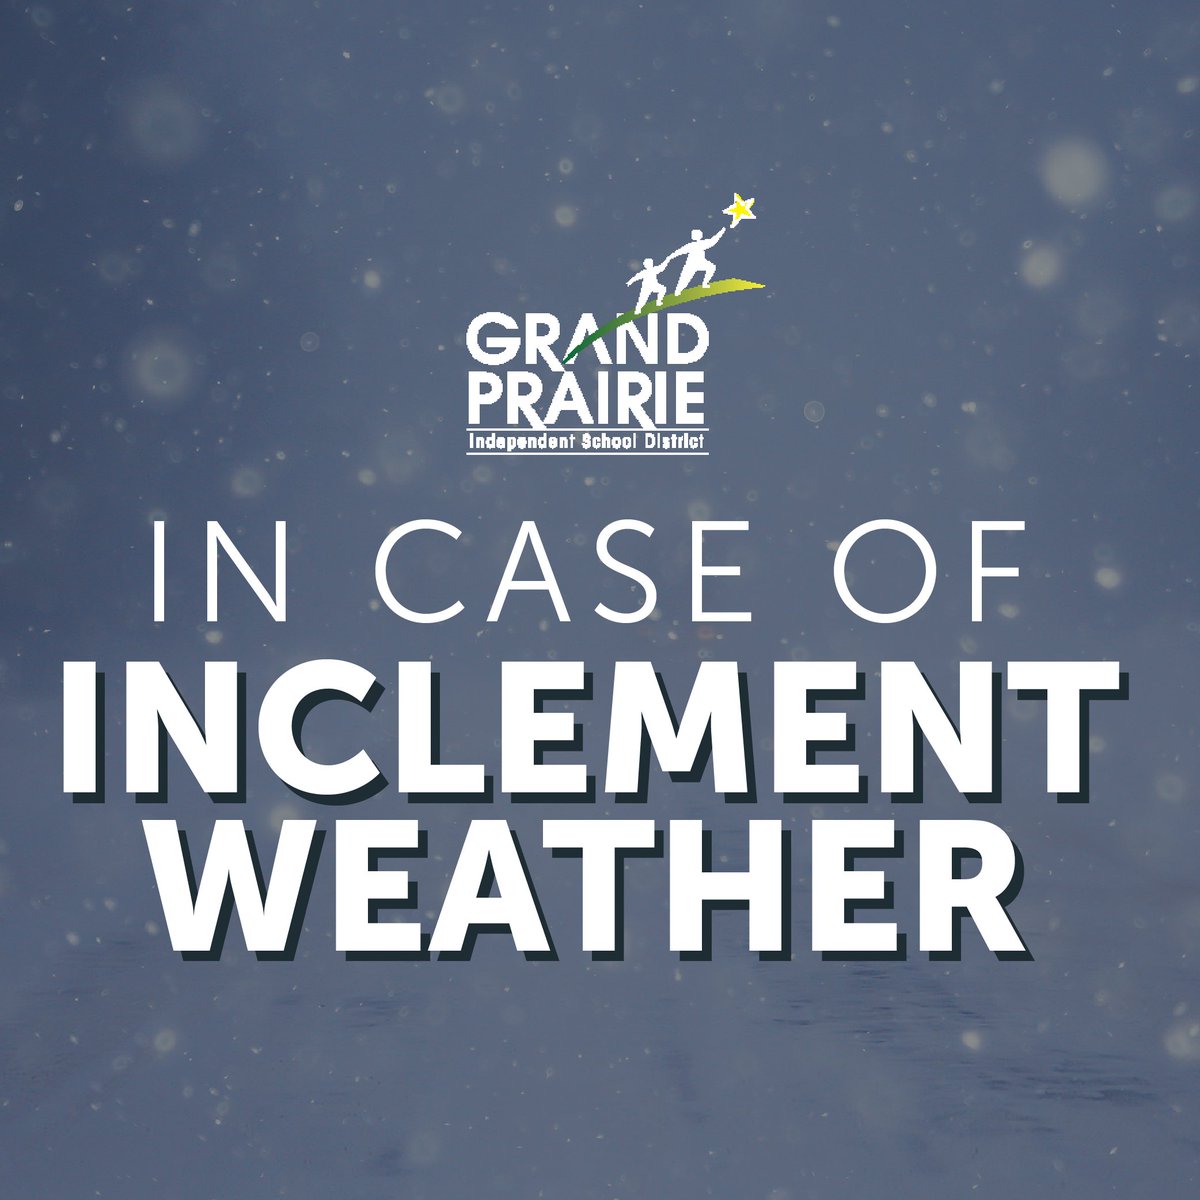 Winter has arrived! If the need arises to close schools, GPISD will send out communication via automated email, text, and a ph. call. Please take time to verify that your contact information in Skyward is up to date. To access Skyward, please click gpisd.org/Skyward